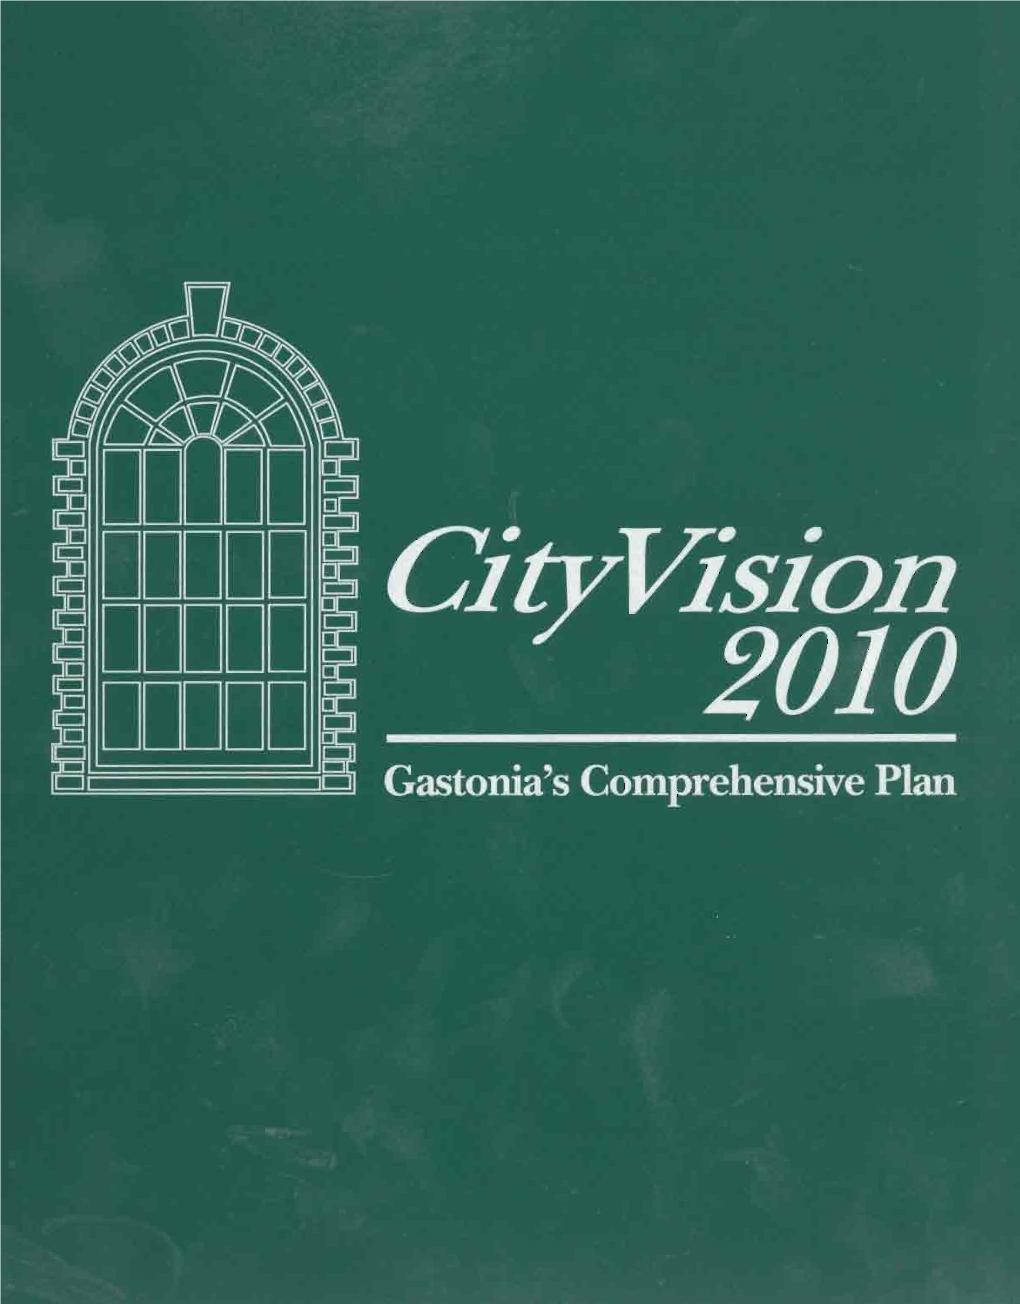 Cityvision 2010 Is Gastonia’S First Comprehensive the Final Section of the Plan Contains the Six Sector Plan